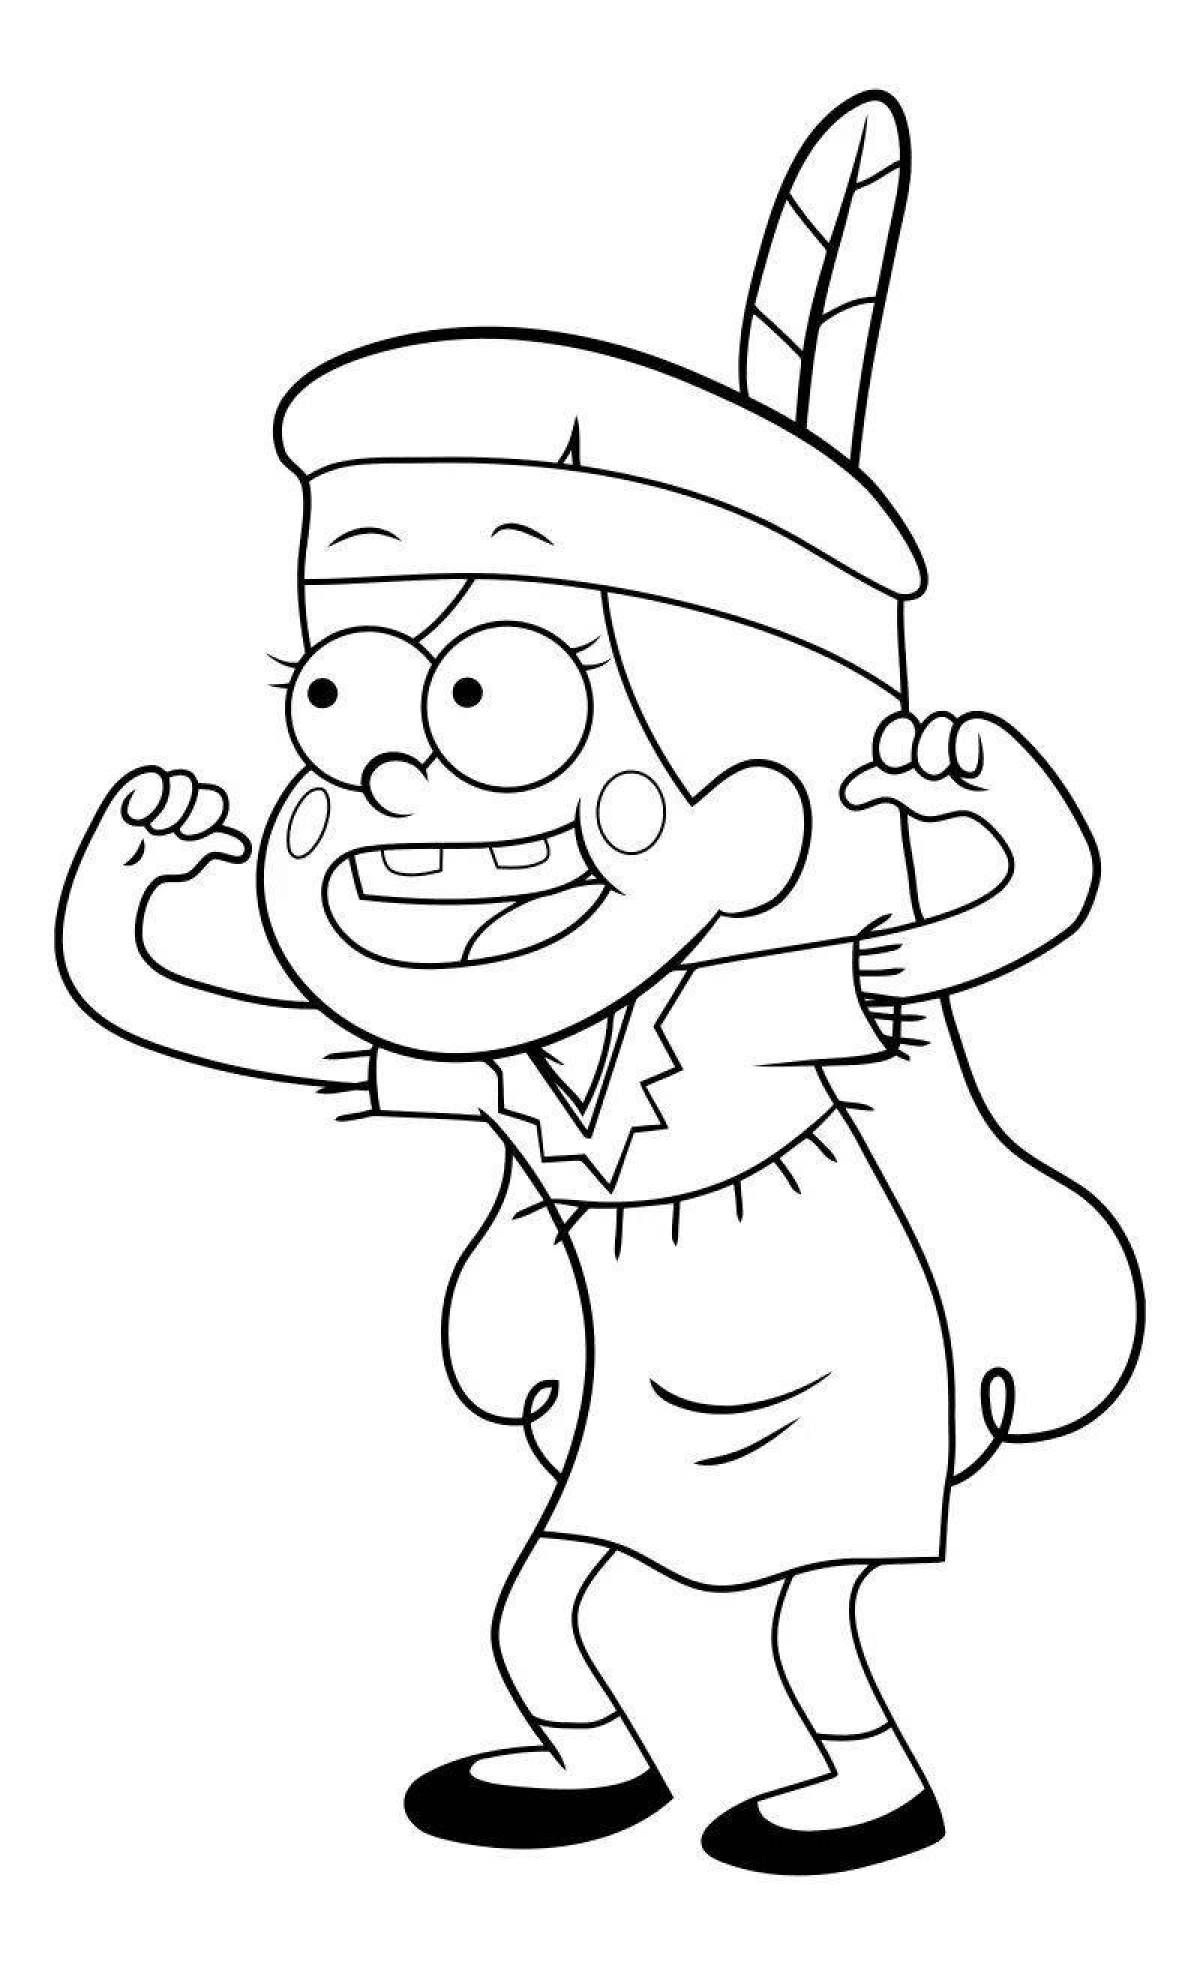 Charming gravity falls coloring book for kids